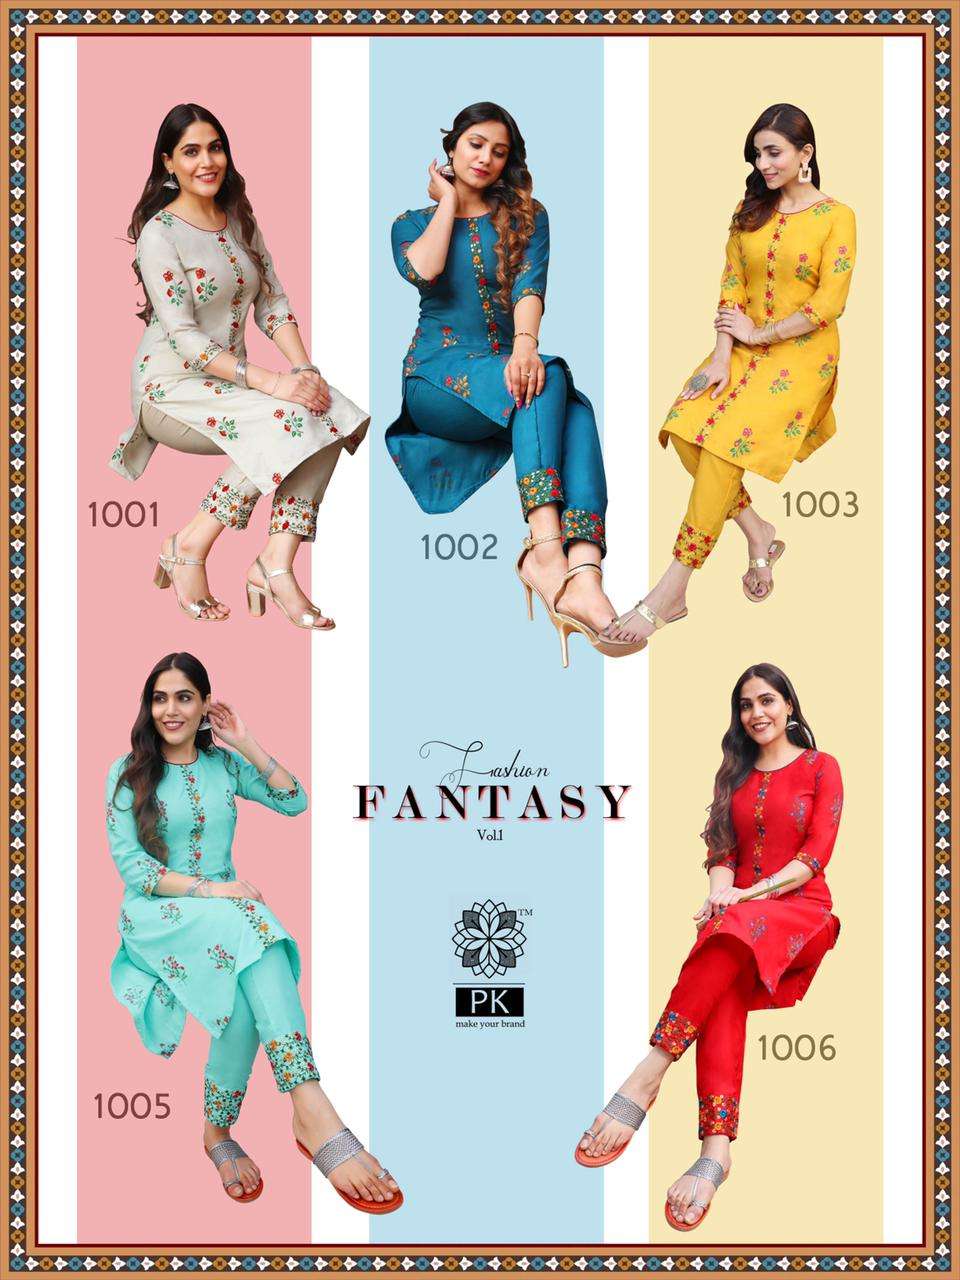 FASHION FANTASY VOL-1 BY PK 1001 TO 1005 SERIES BEAUTIFUL STYLISH FANCY COLORFUL CASUAL WEAR & ETHNIC WEAR HEAVY COTTON PRINT WITH WORK KURTIS WITH BOTTOM AT WHOLESALE PRICE